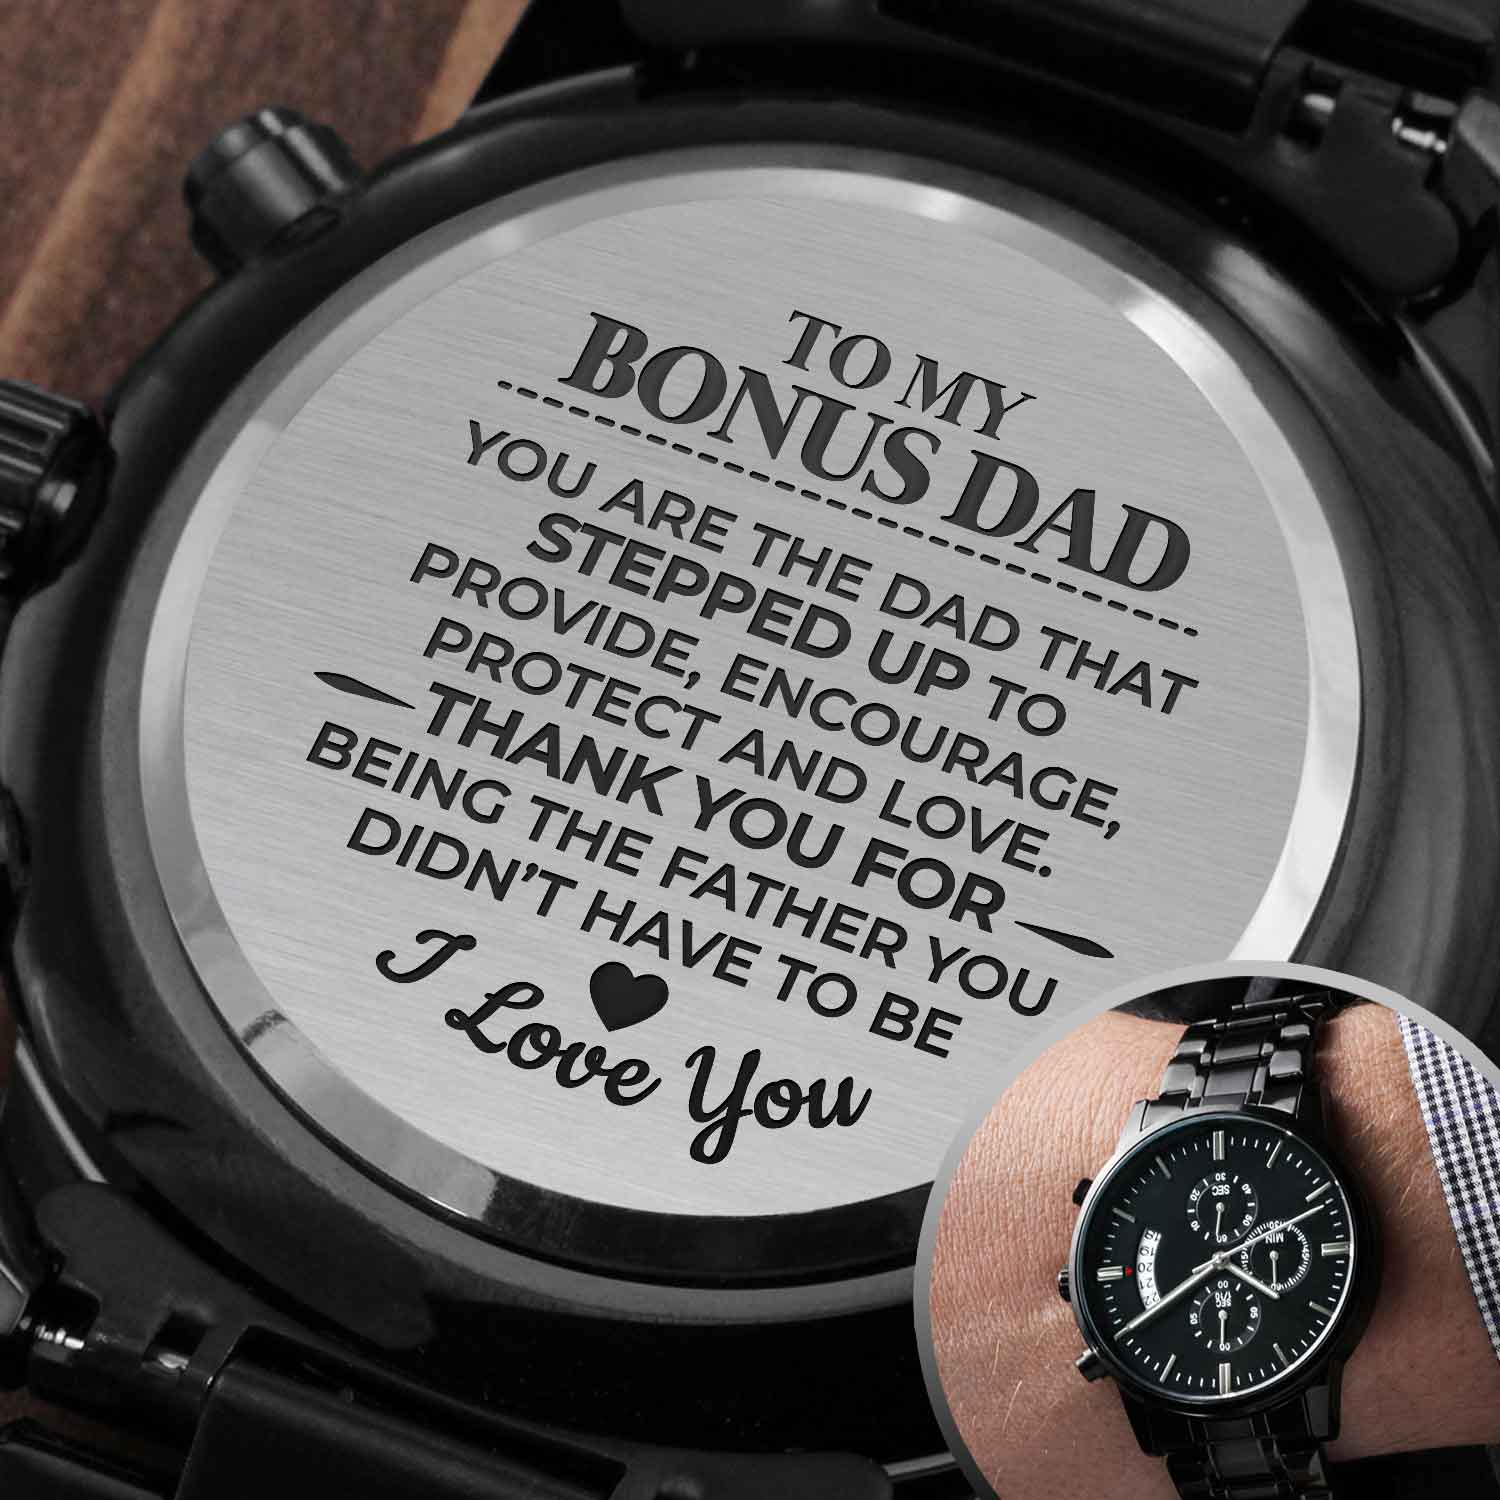 ShineOn Fulfillment Watches Two-Toned Box To My Bonus Dad - You Are The Dad That Stepped Up - Premium Watch